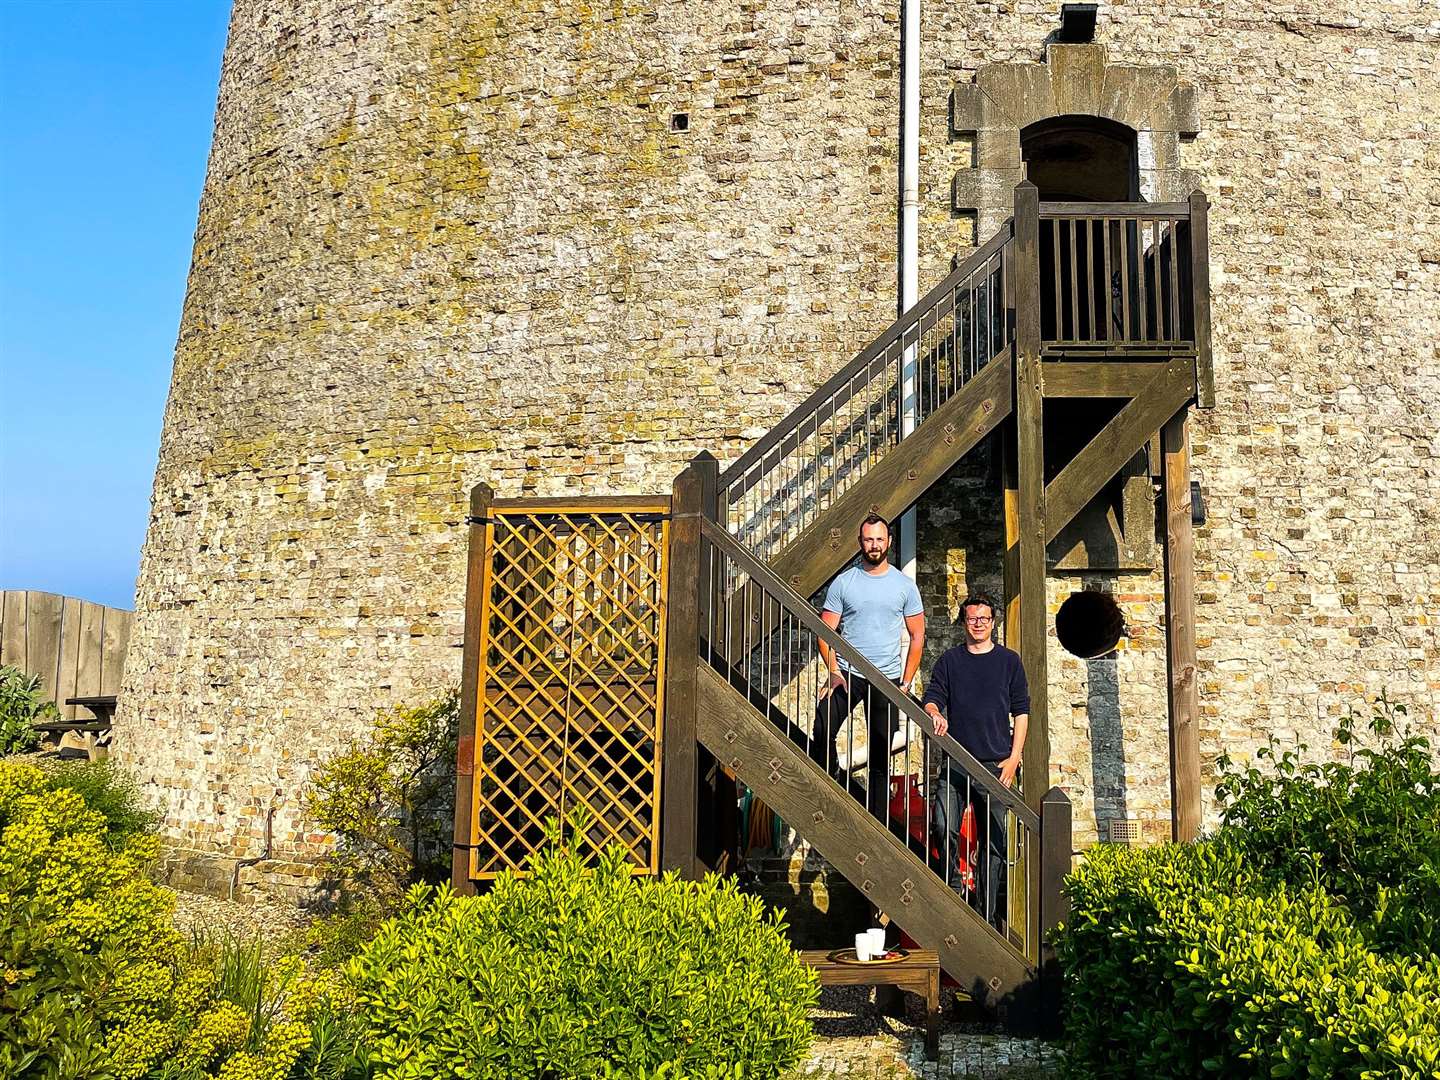 Daniel (left) and James on their trip exploring the Martello Towers. All pictures: Daniel Falvey